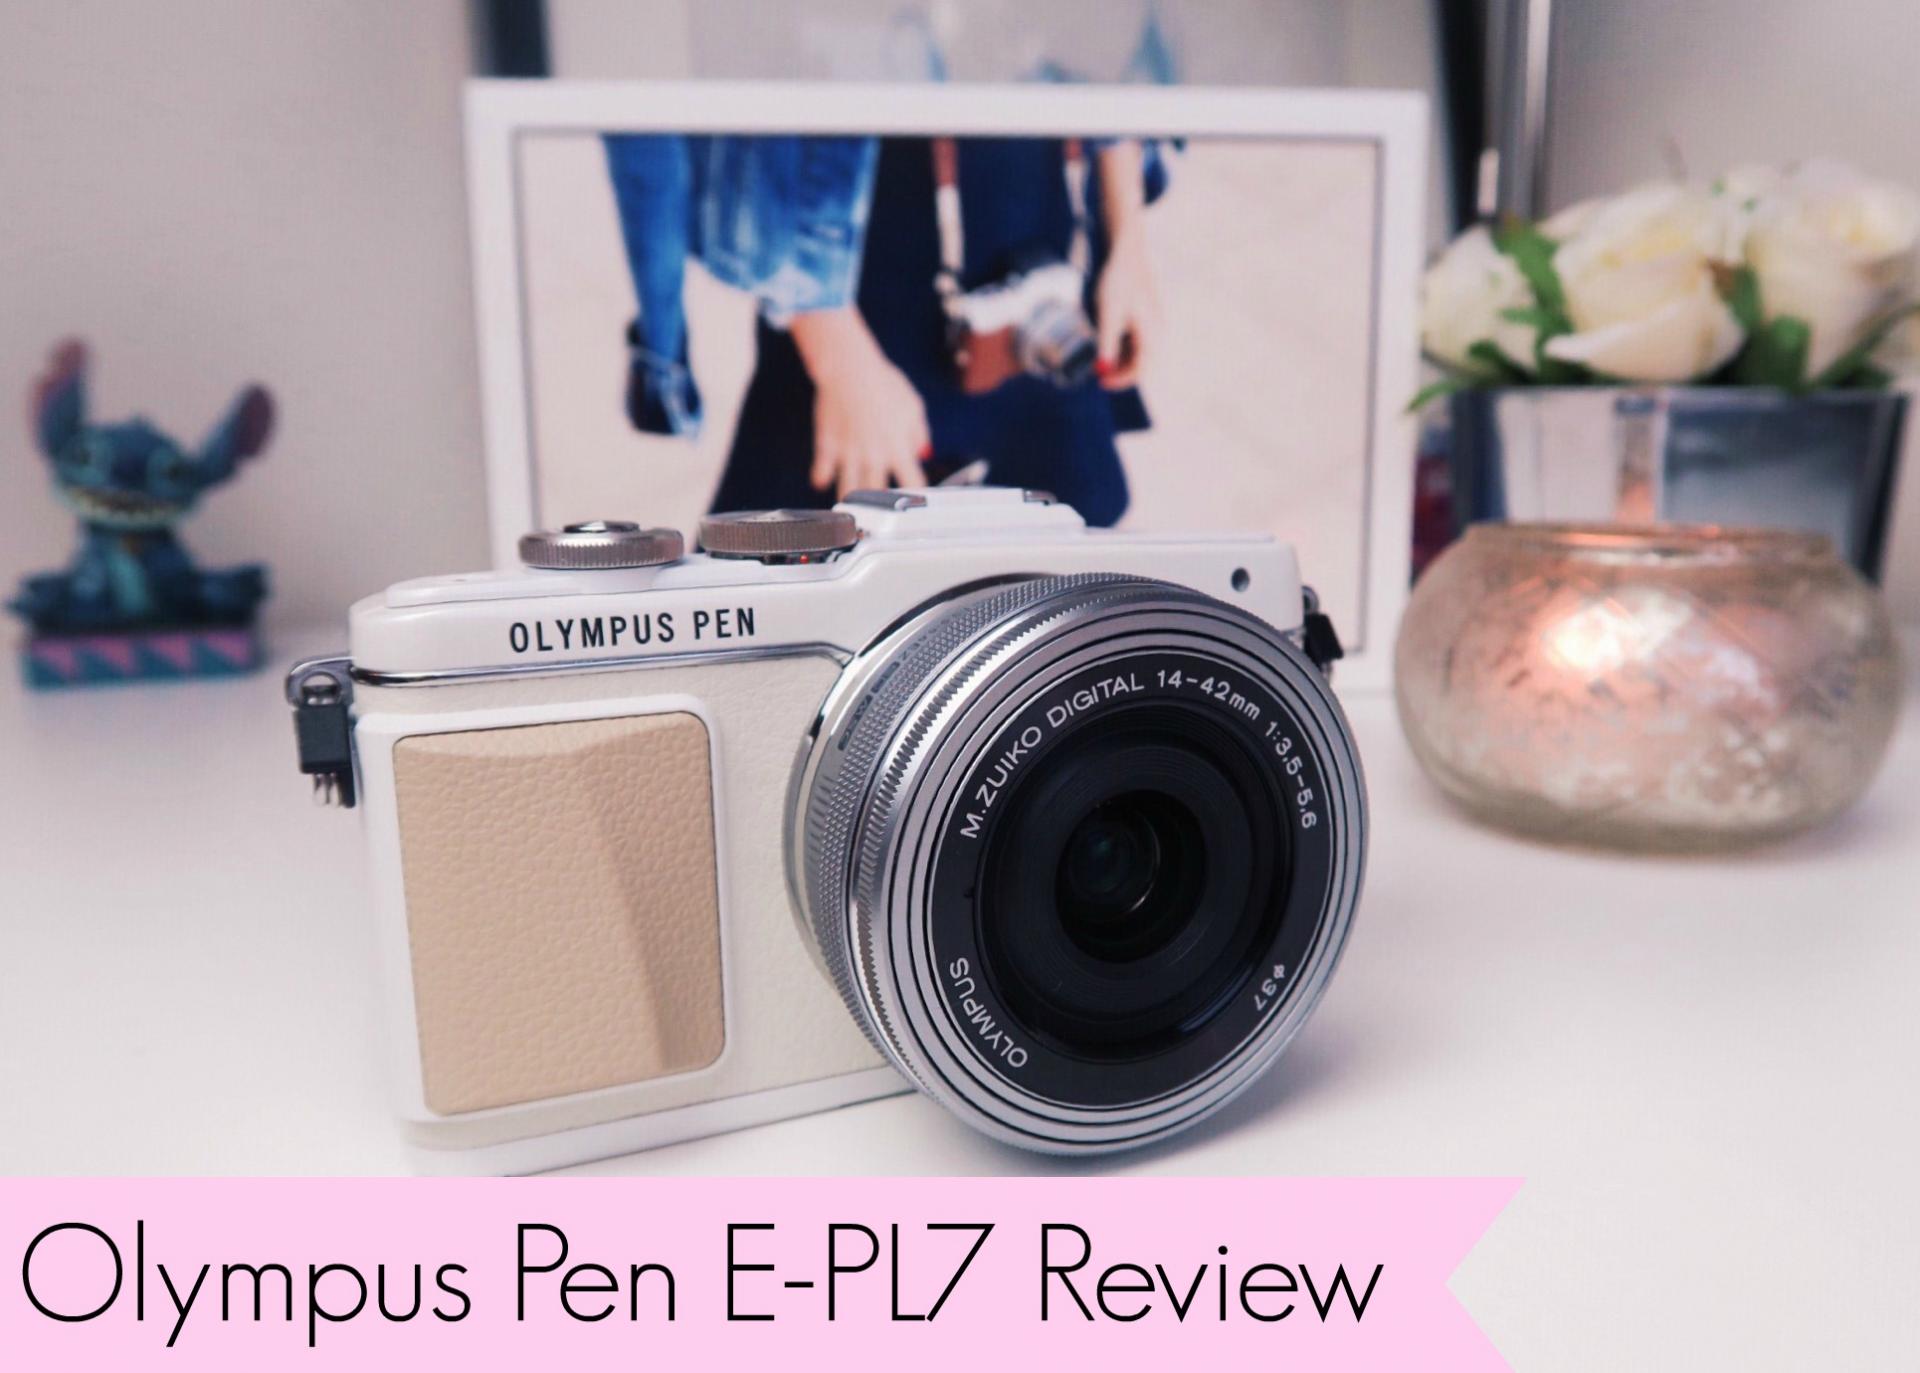 Olympus Pen E-PL7 Review: My Thoughts - Charlotte Ruff